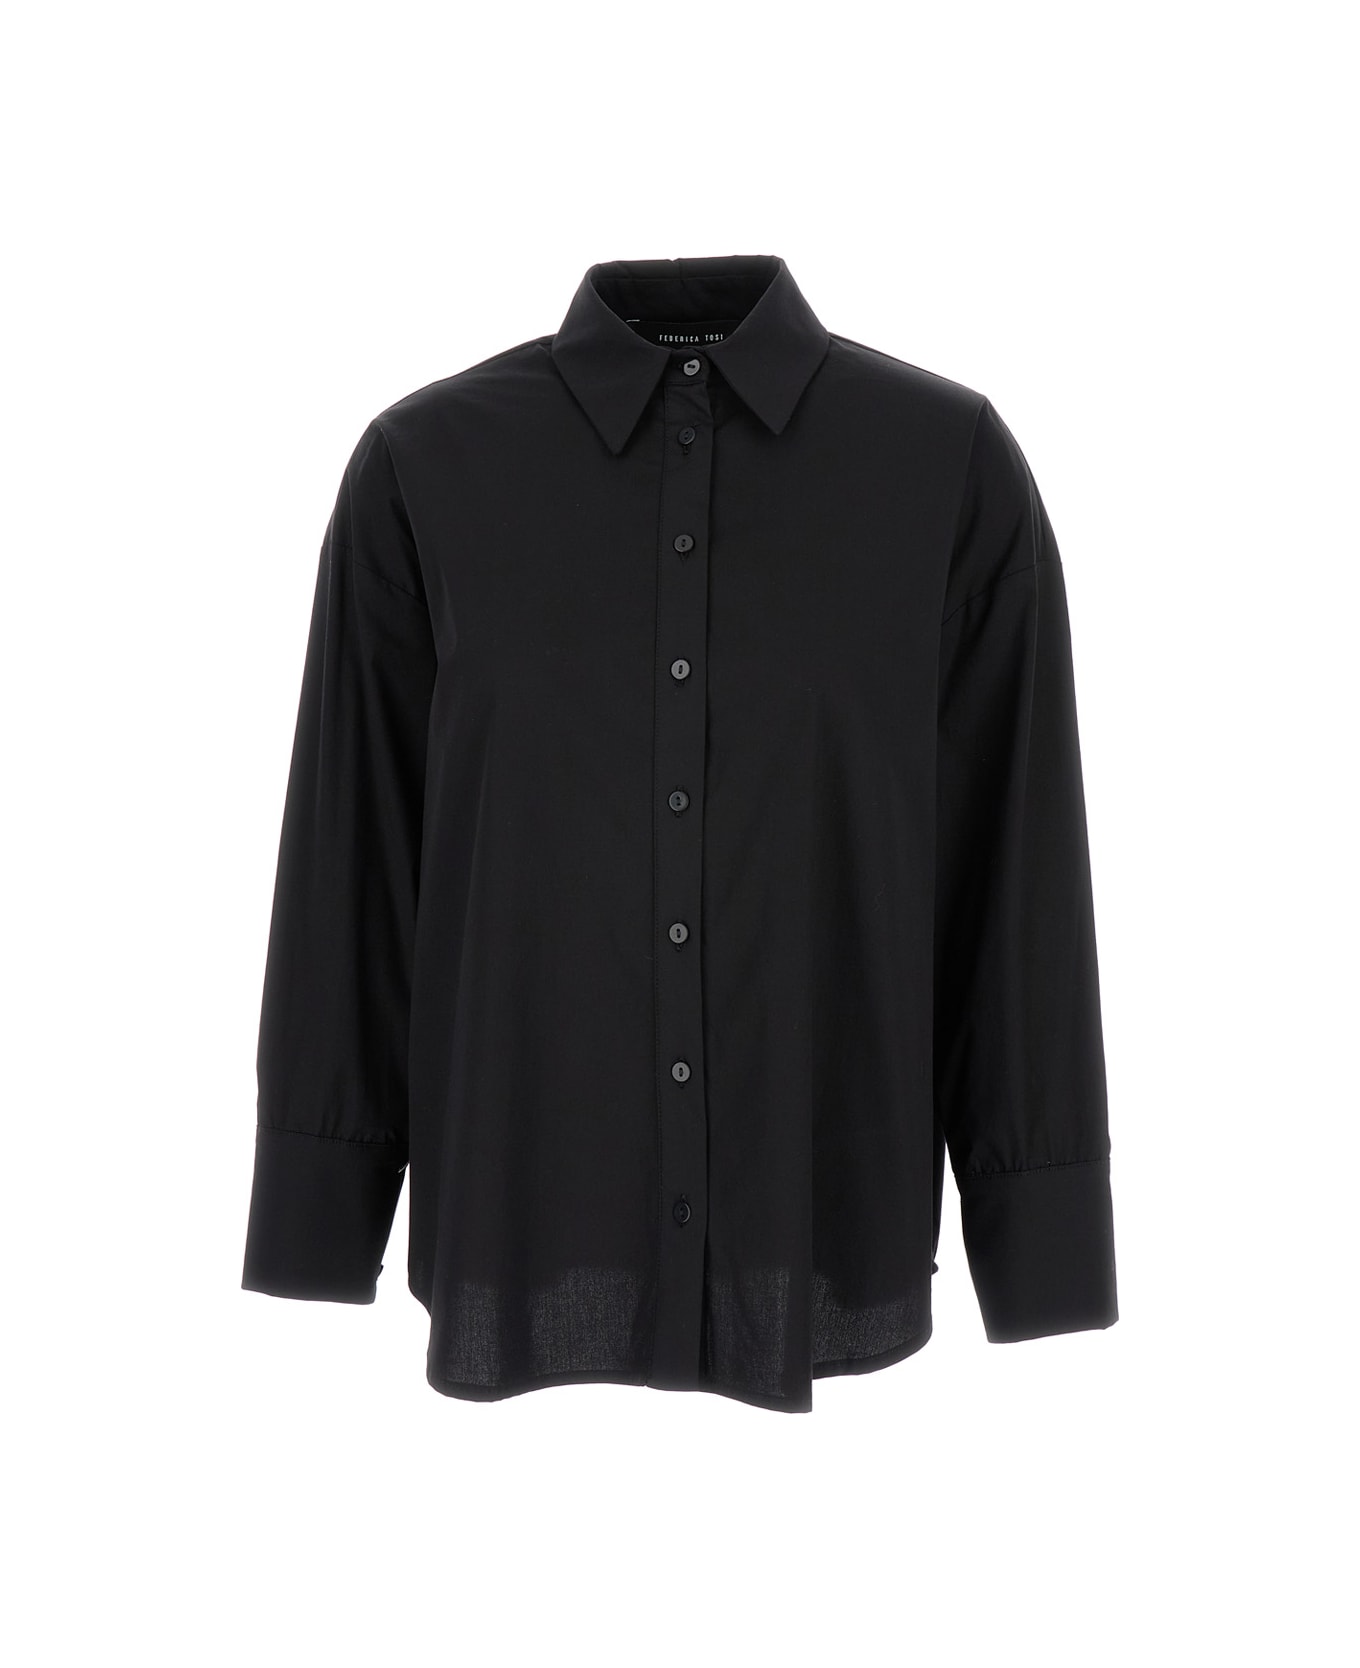 Federica Tosi Black Long Sleeves Shirt In Cotton Blend Woman - Black シャツ